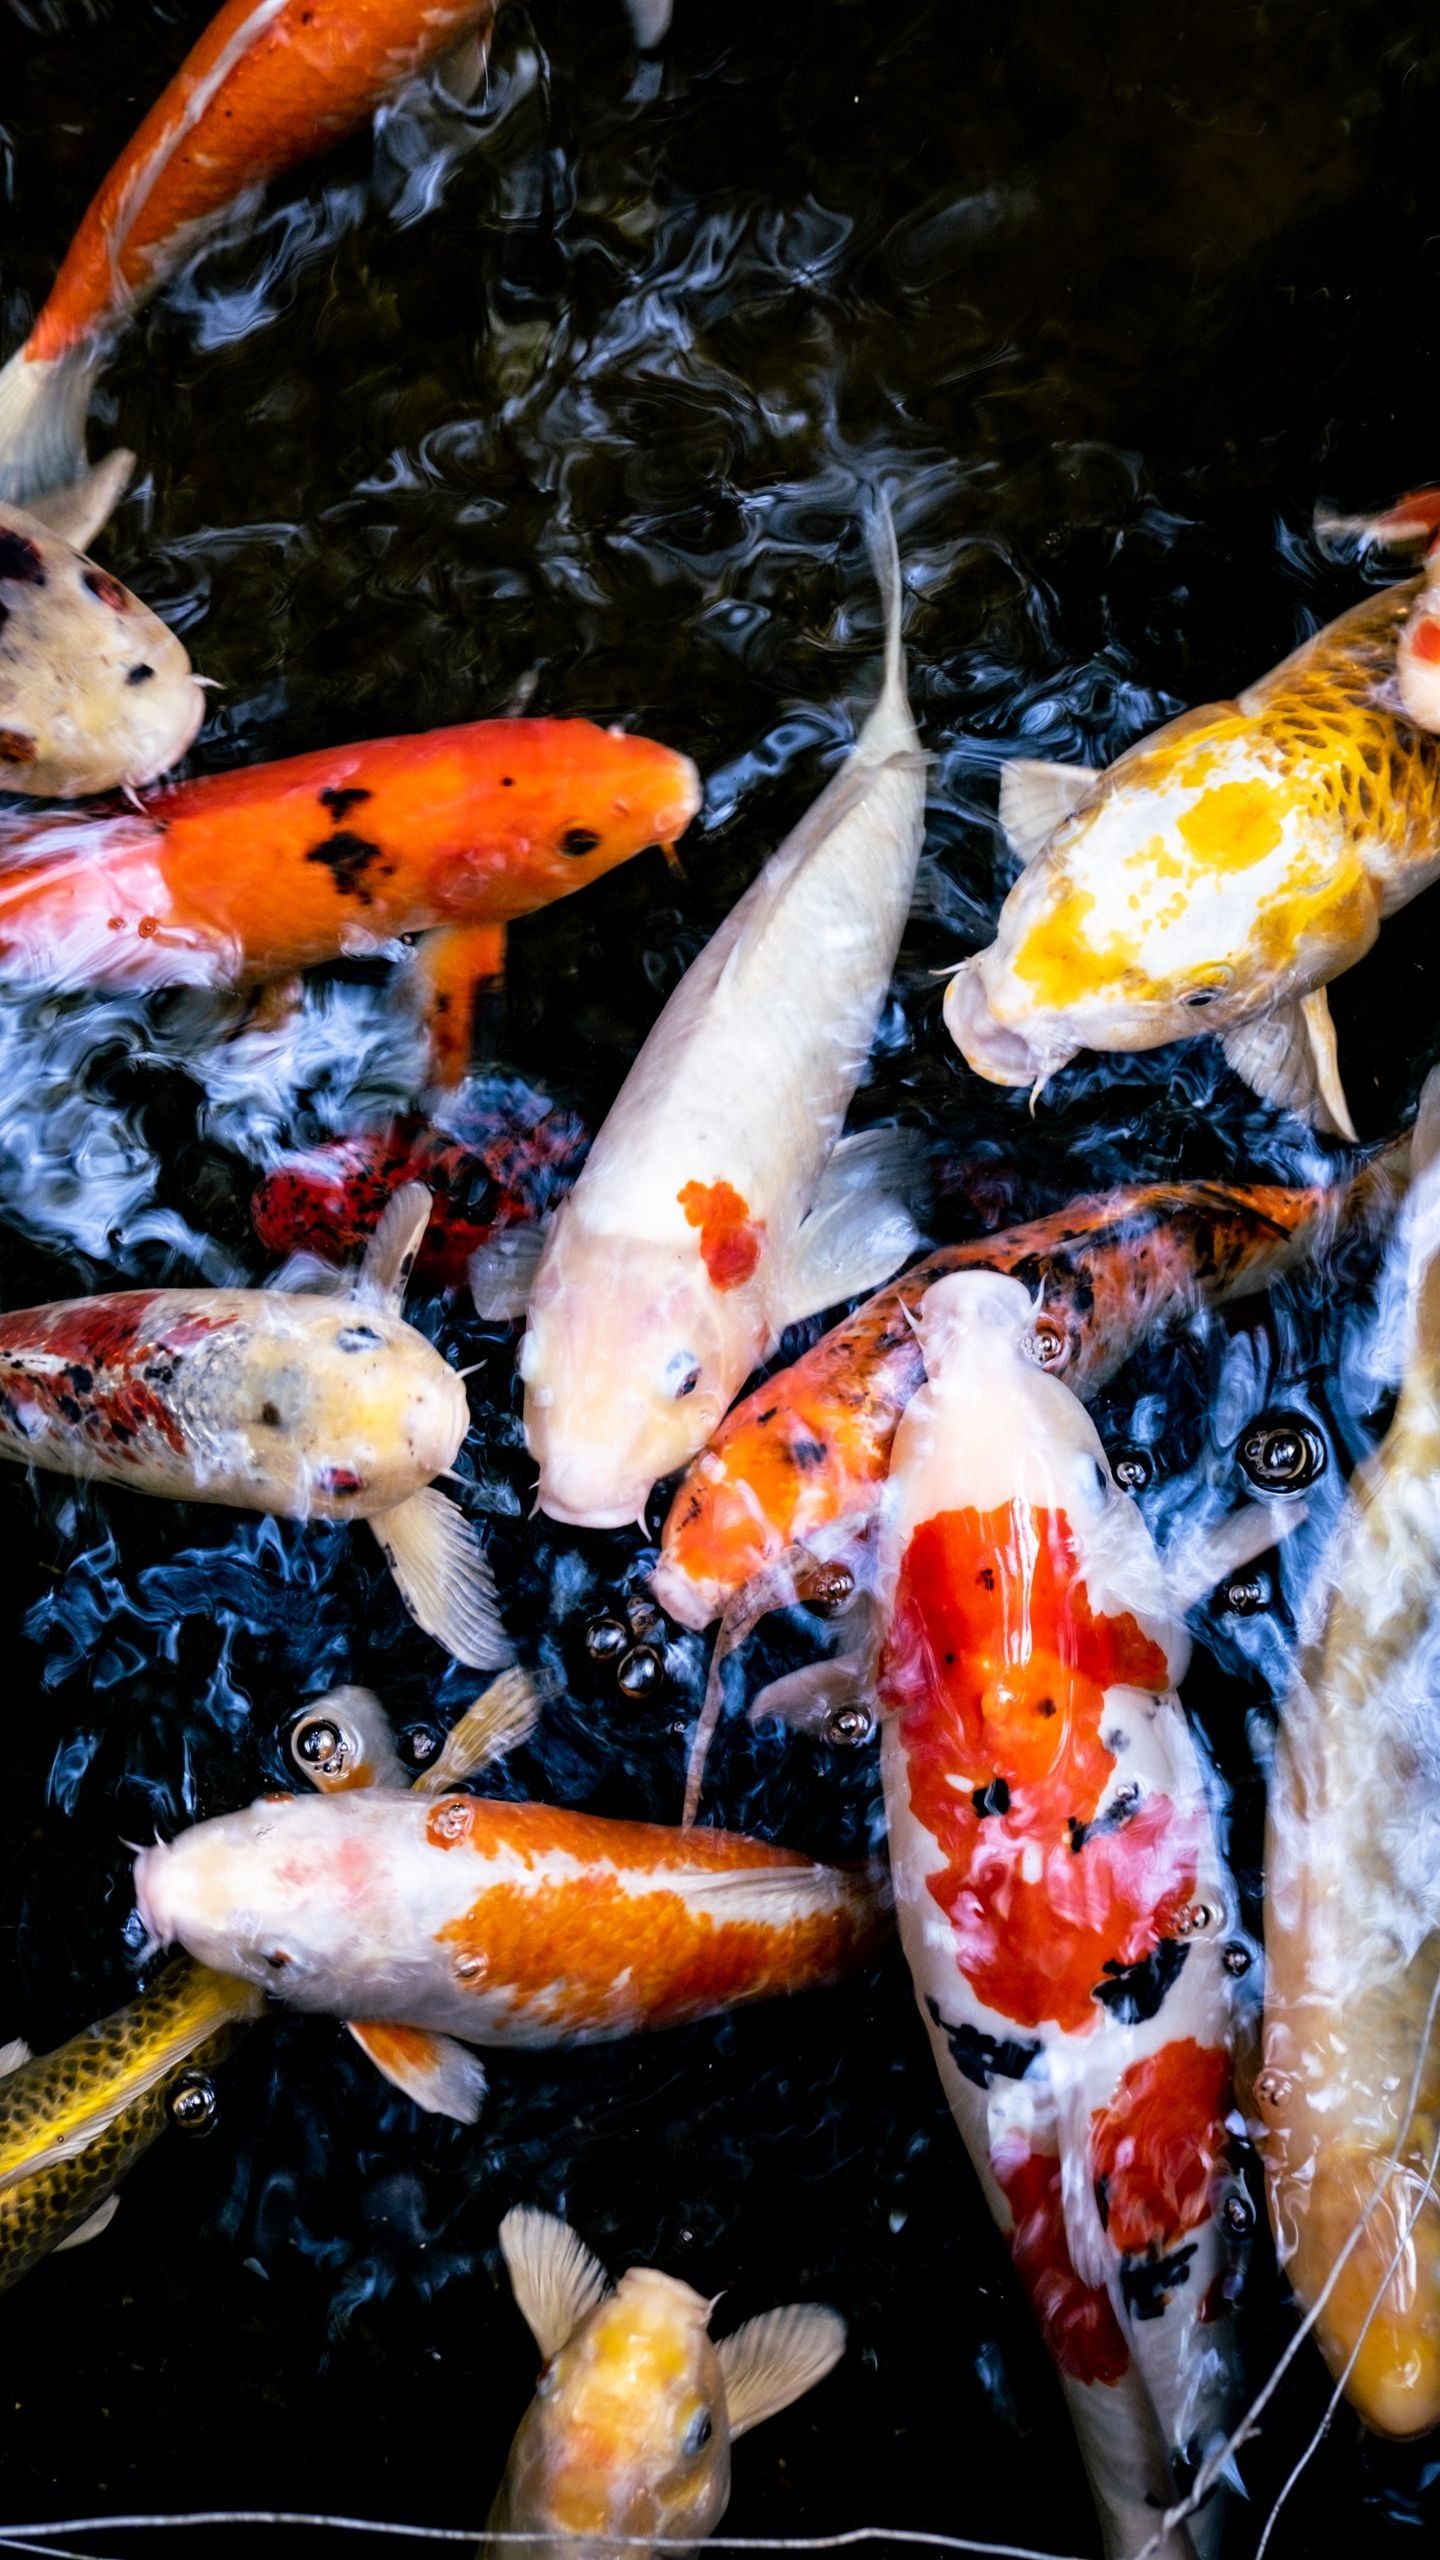 A group of colorful koi fish swimming in a pond - Koi fish